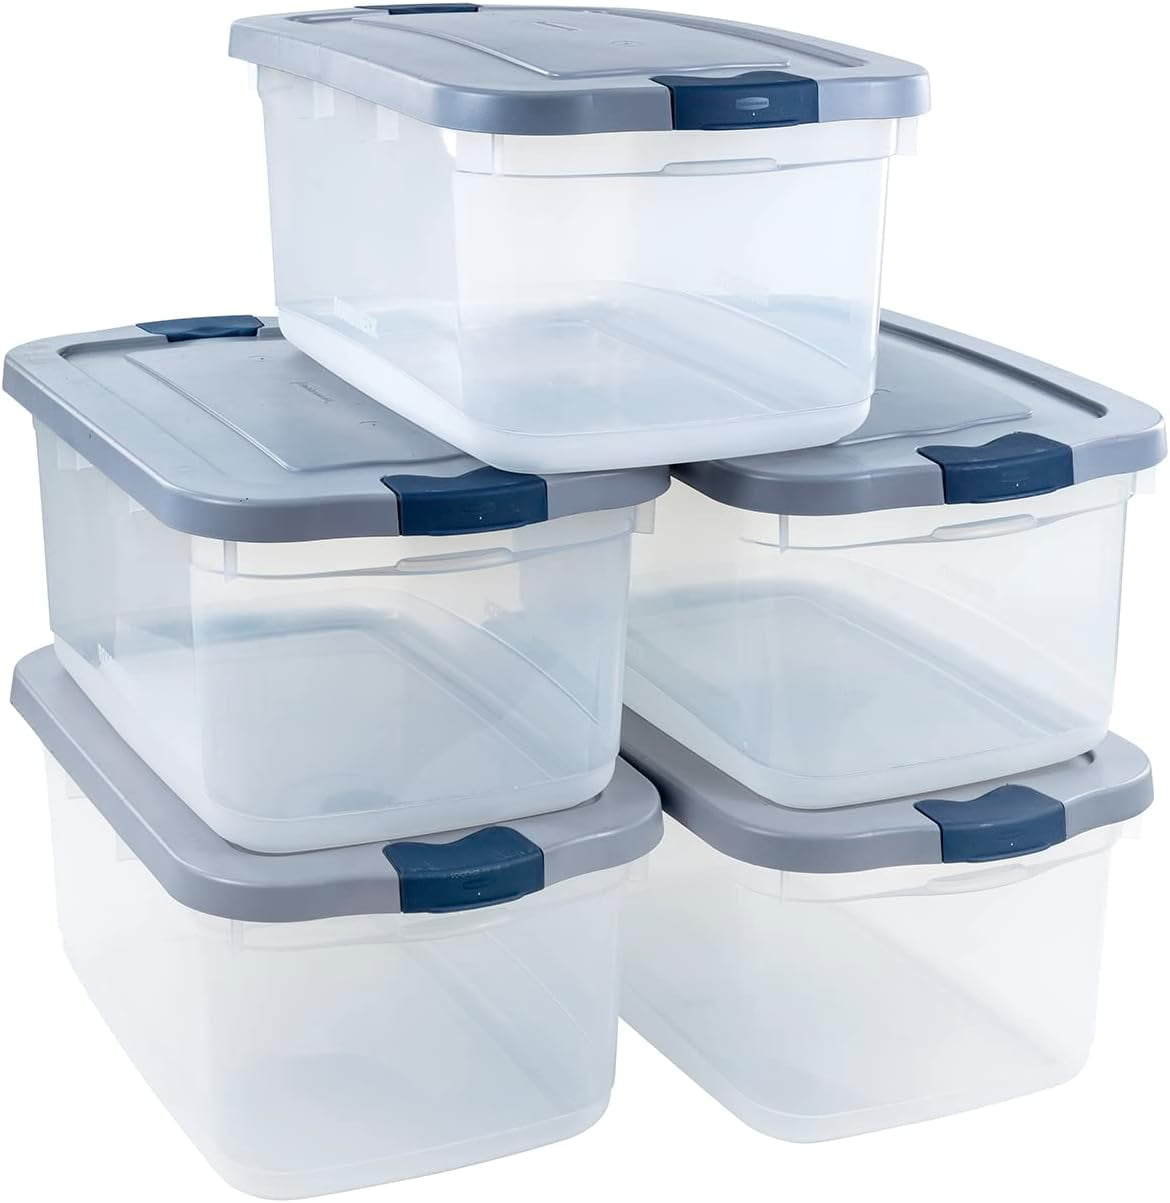 Rubbermaid Roughneck Clear Storage Container 5-Pack $34.95 from $62